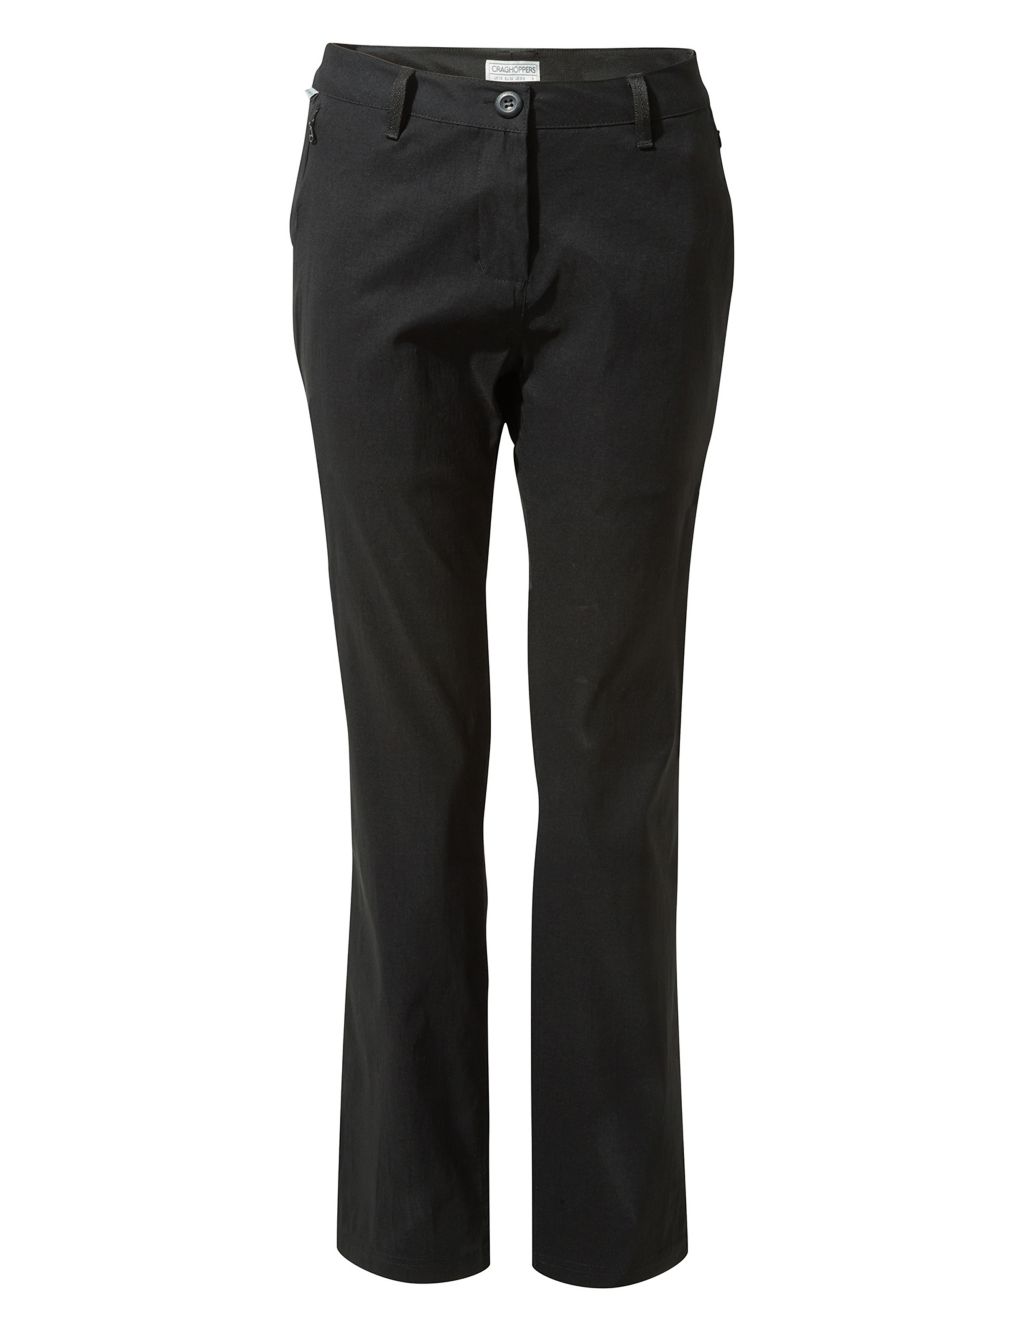 Kiwi Pro Tapered Trousers 1 of 5